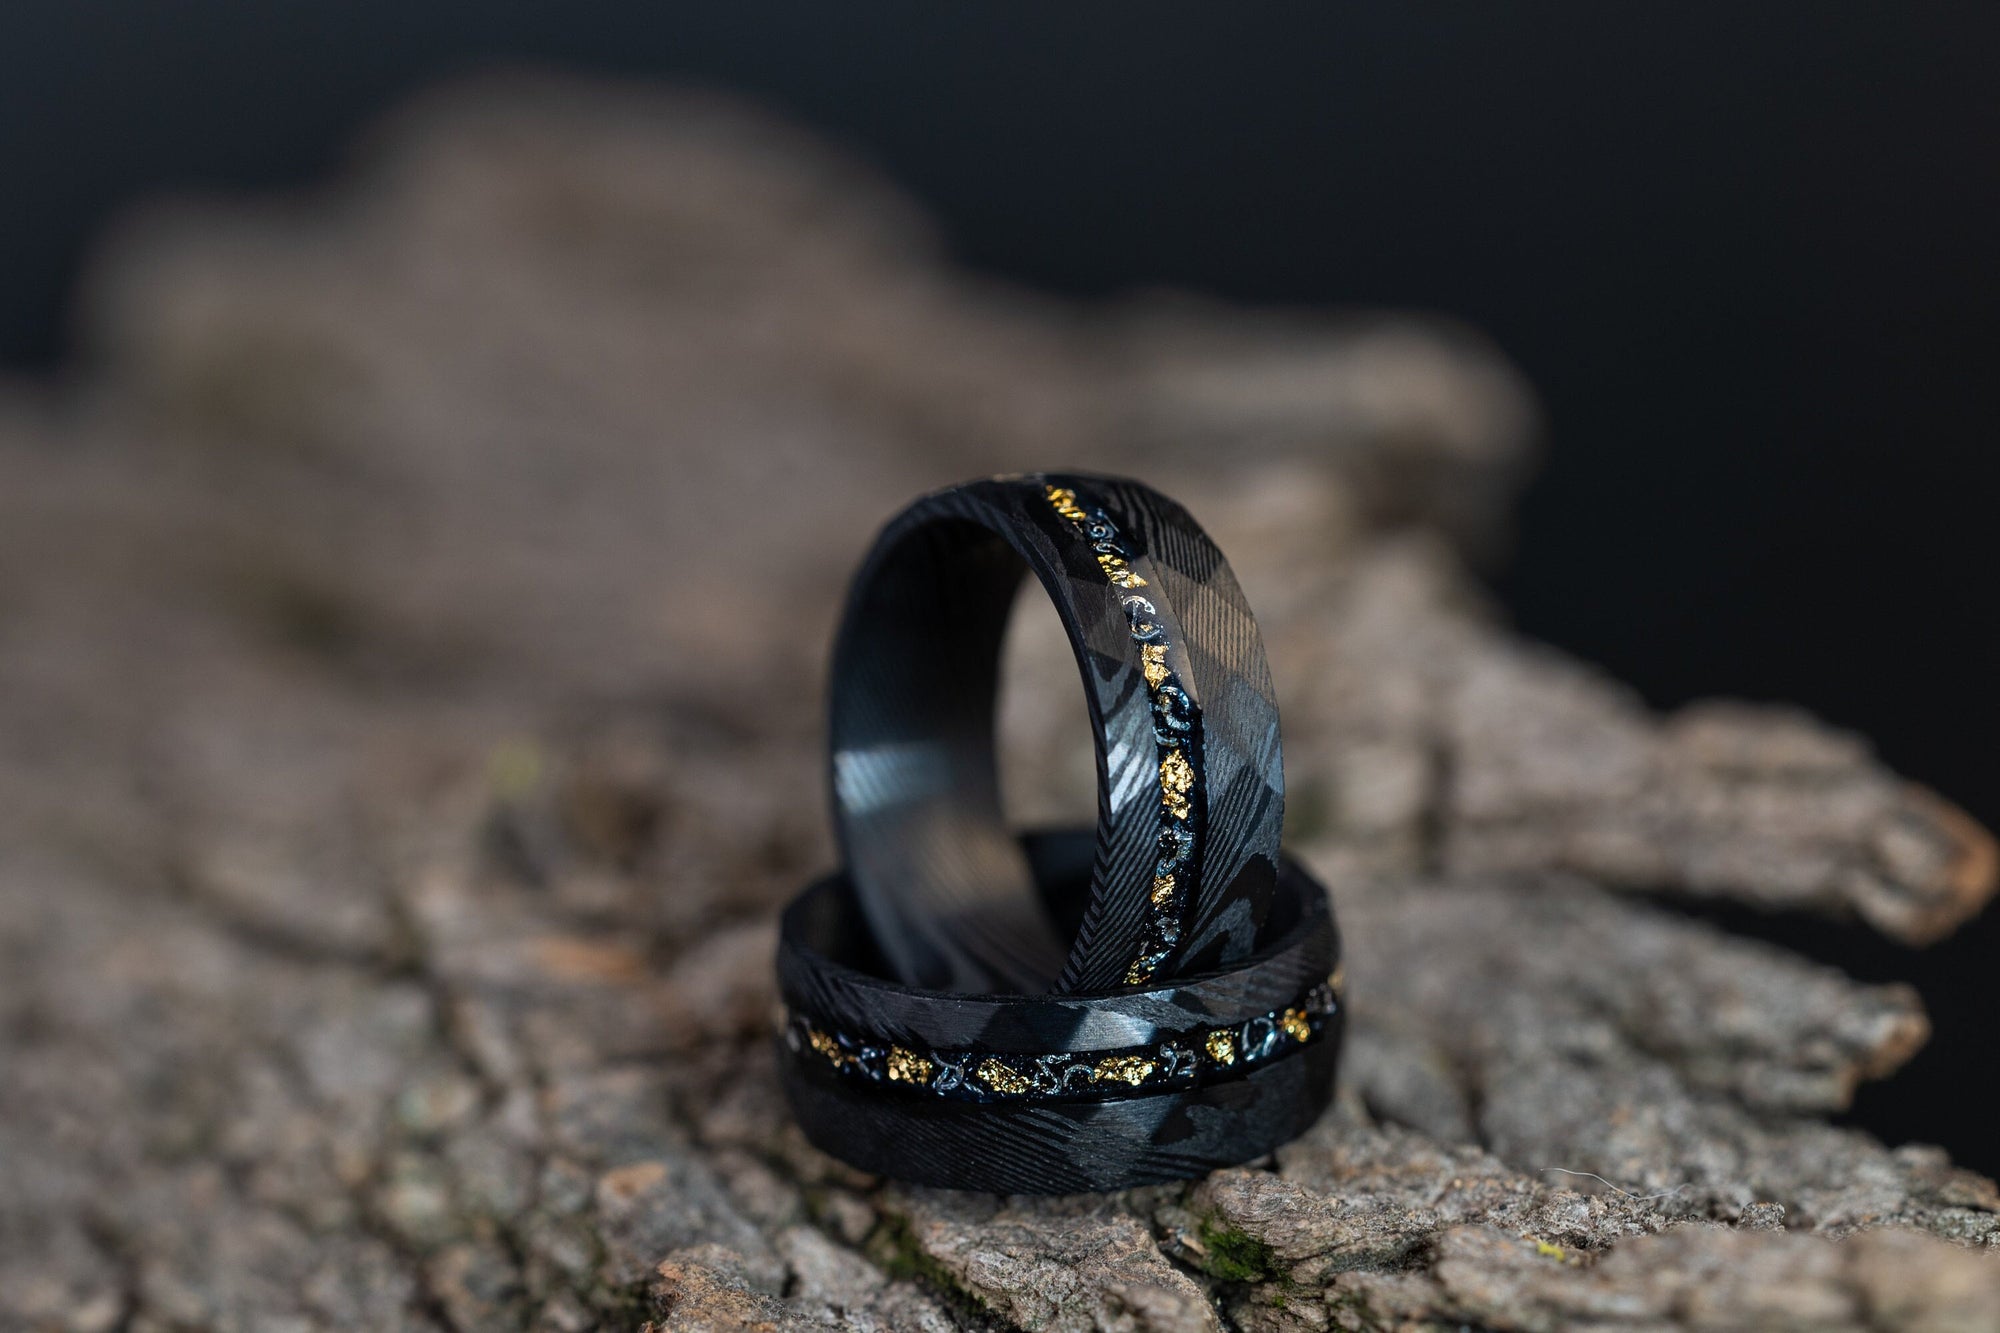 Damascus Meteorite & Crushed Gold Leaf, Crushed Gold Leaf Ring, Meteorite Ring, Man Wedding Band, Black Steel Hammered Ring, 8mm Ring